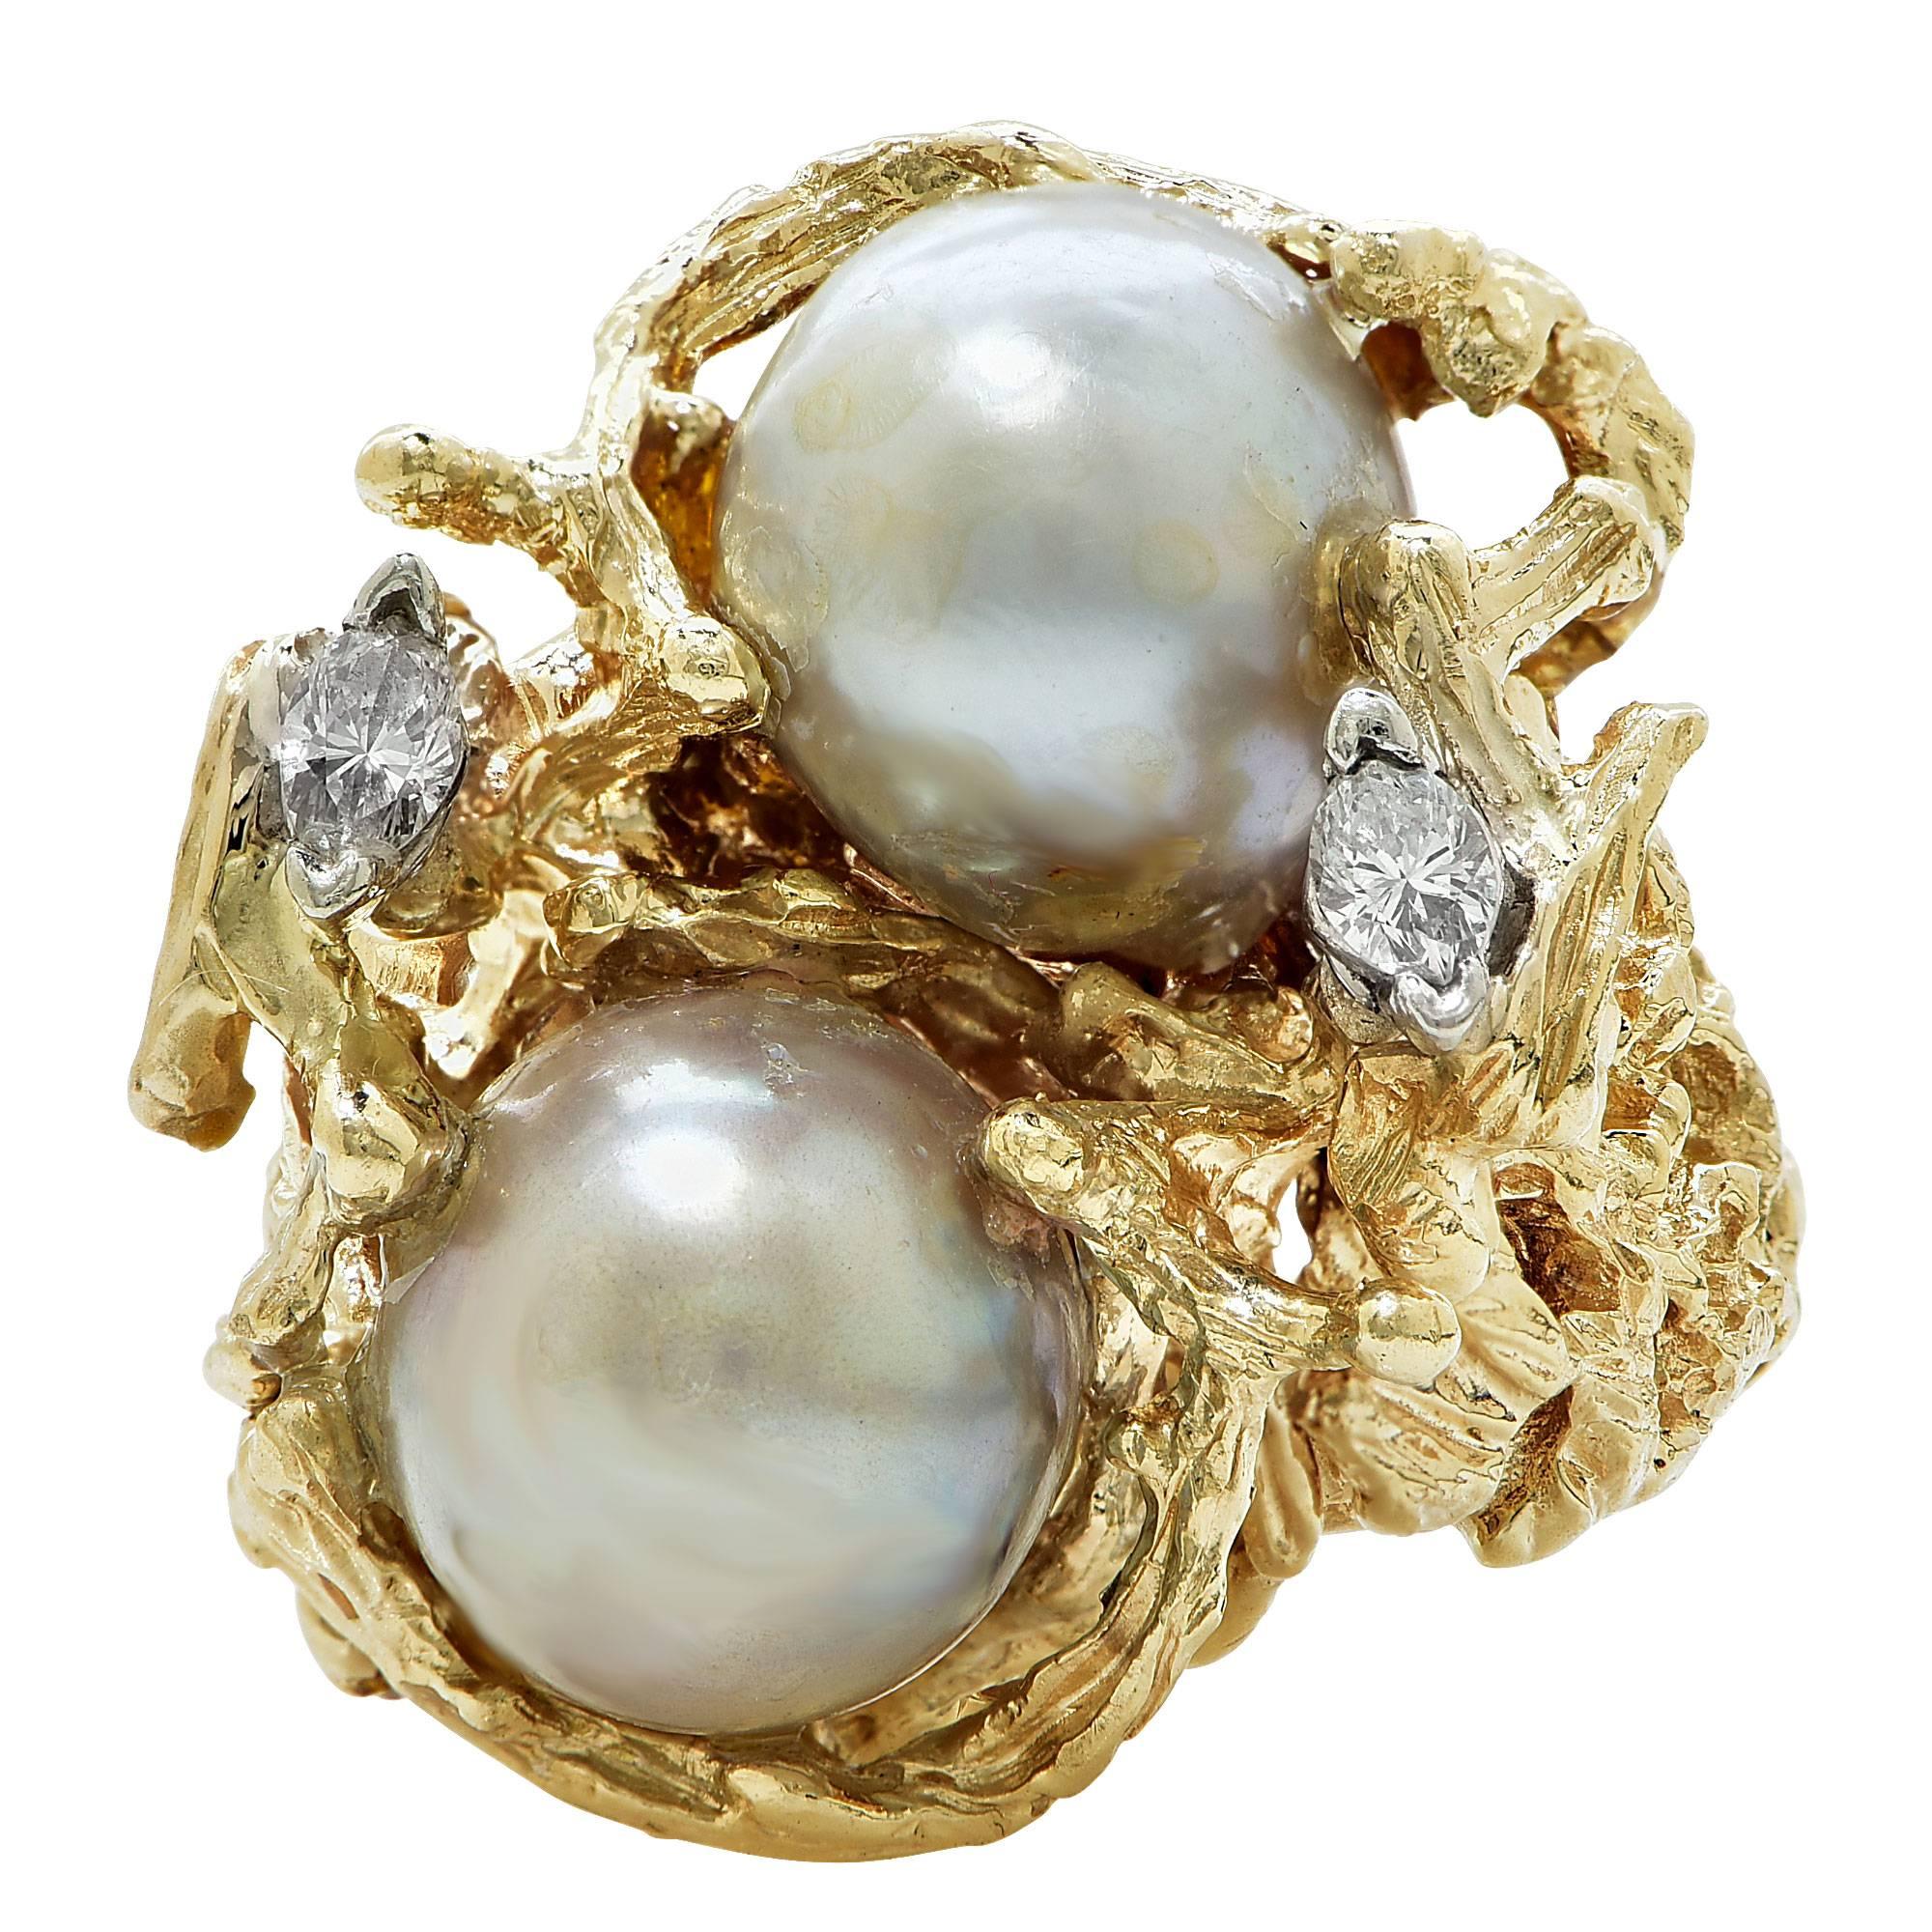 14k yellow gold ring featuring 2 fresh water pearls measuring 10mm accented by 2 marquise cut diamonds weighing .10cts total I color VS clarity.

The ring is a size 6 and can be sized up or down.
It is stamped and tested as 14k gold.
The metal